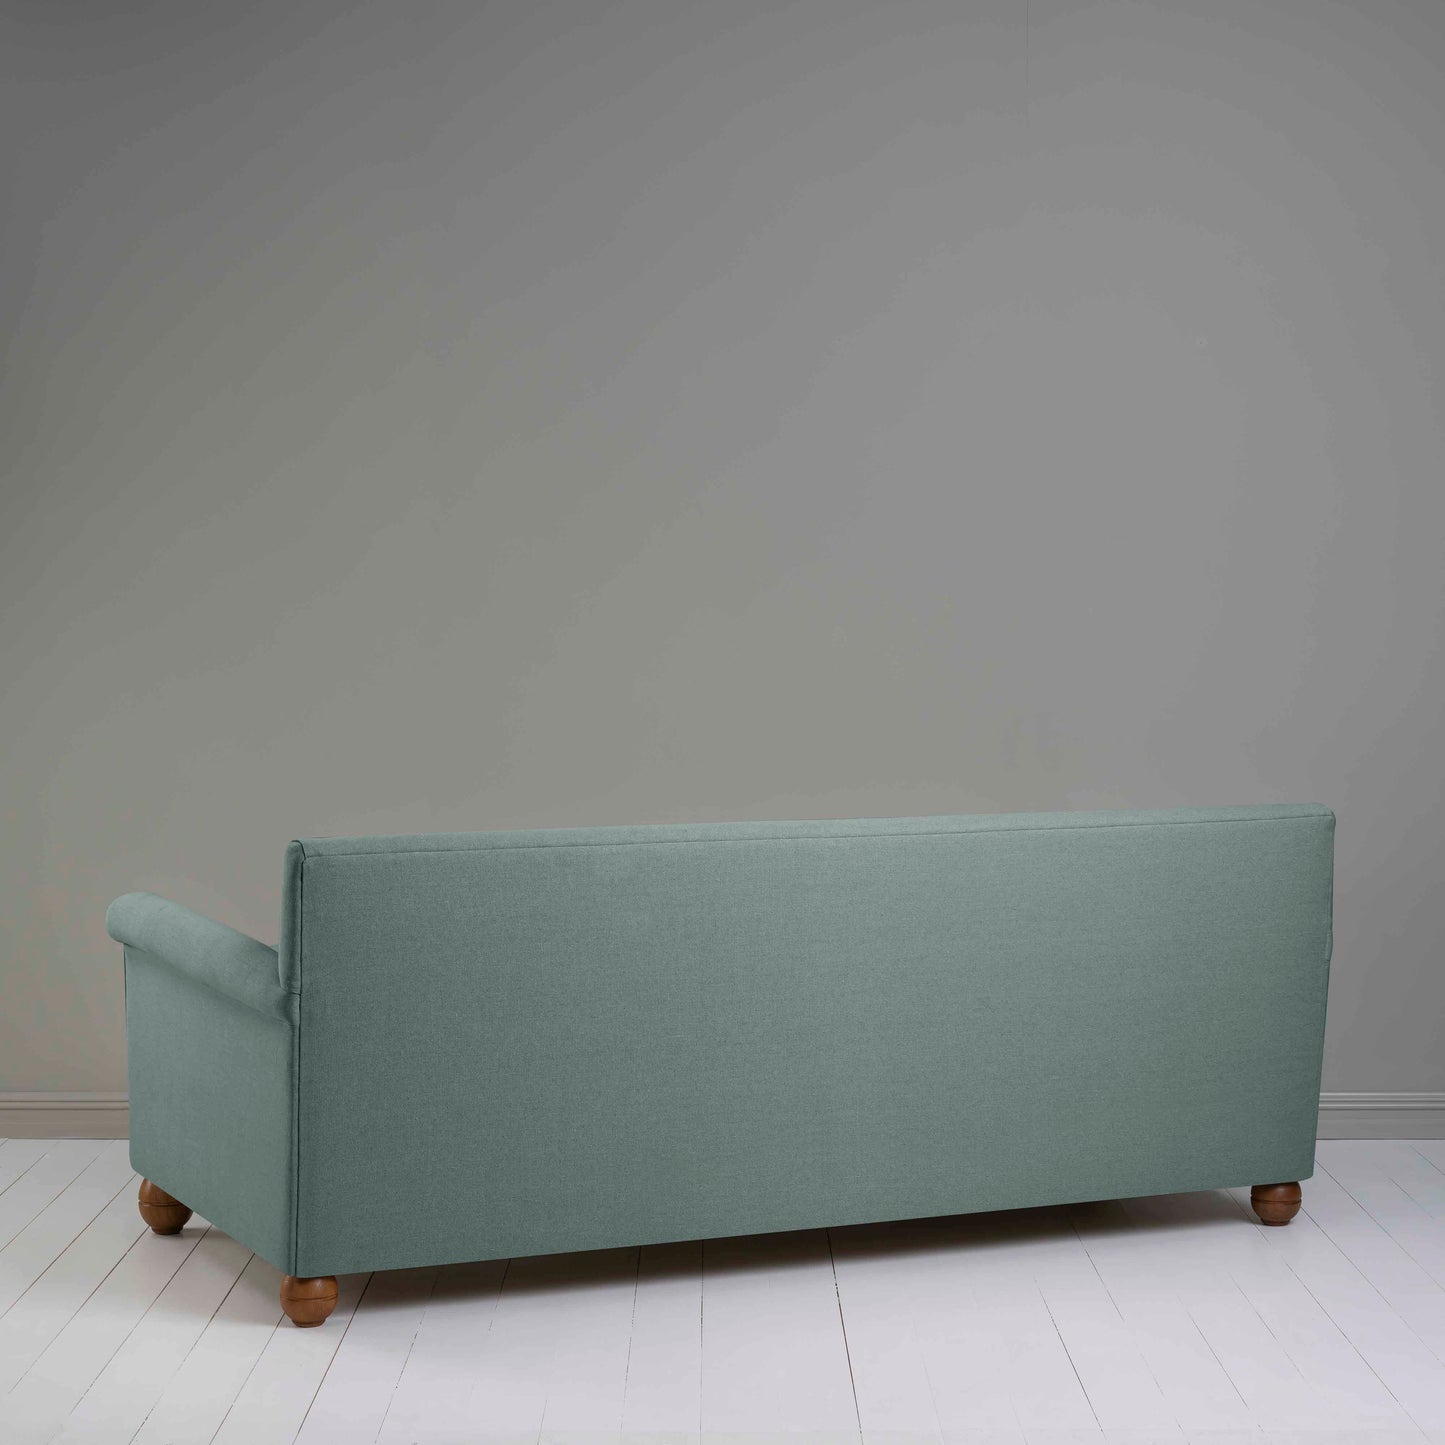 Idler 4 seater sofa in Laidback Linen Mineral